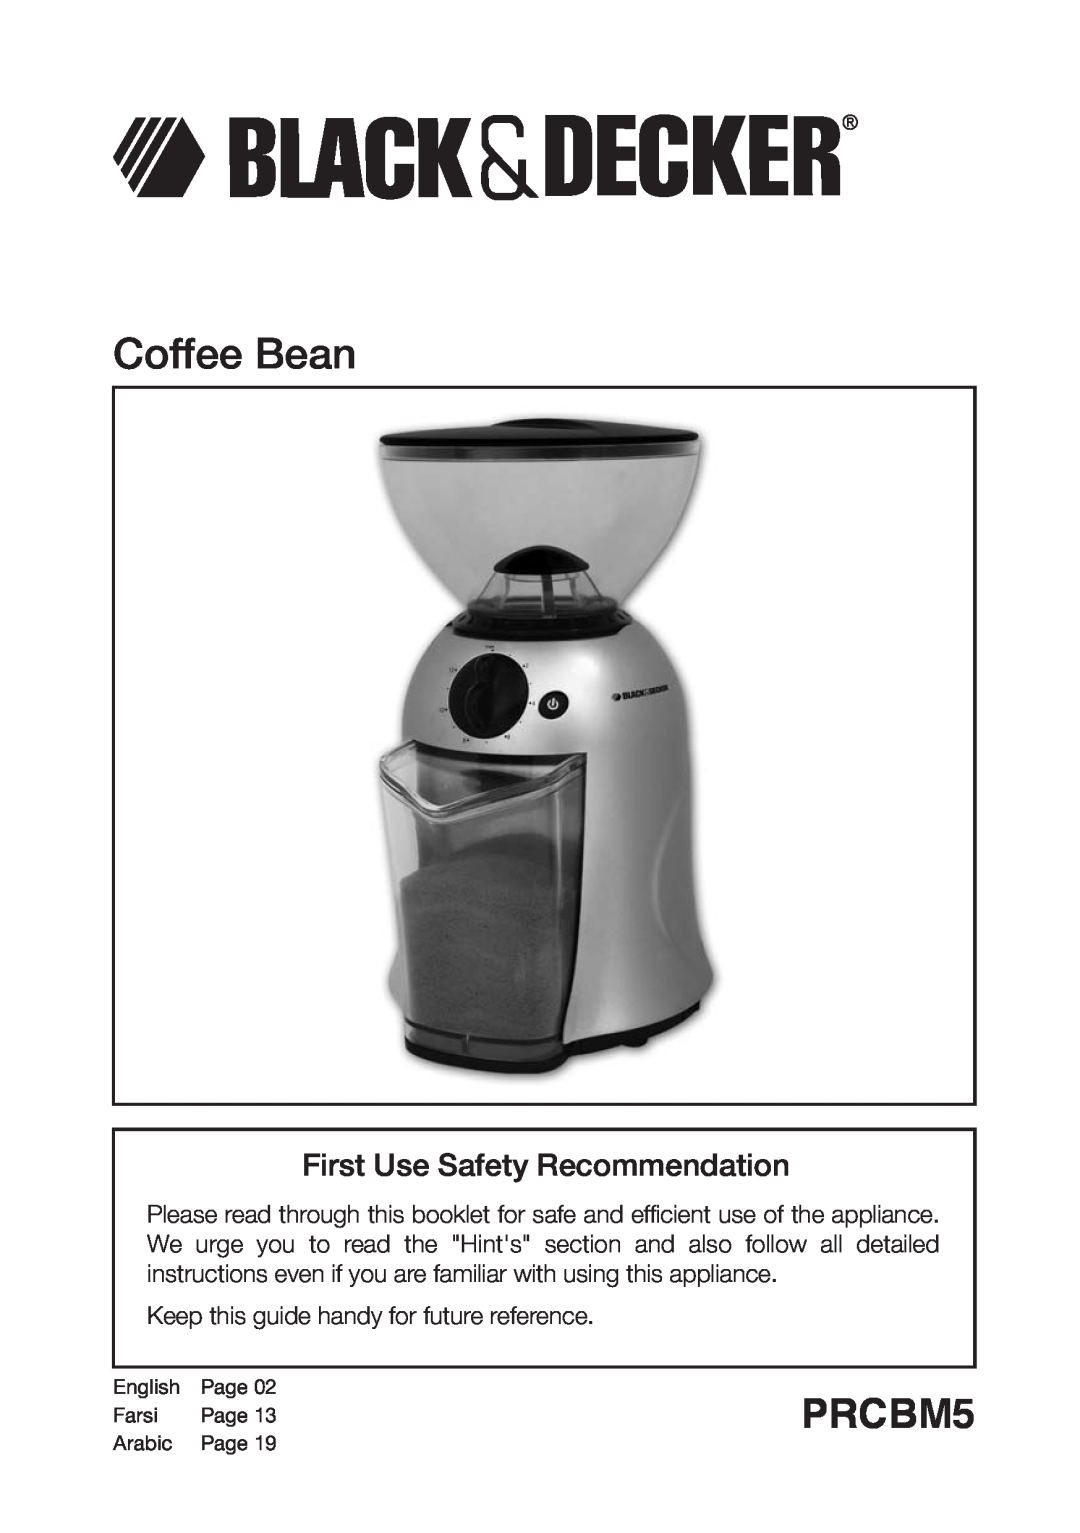 Black & Decker PRCBM5 manual Coffee Bean, First Use Safety Recommendation 